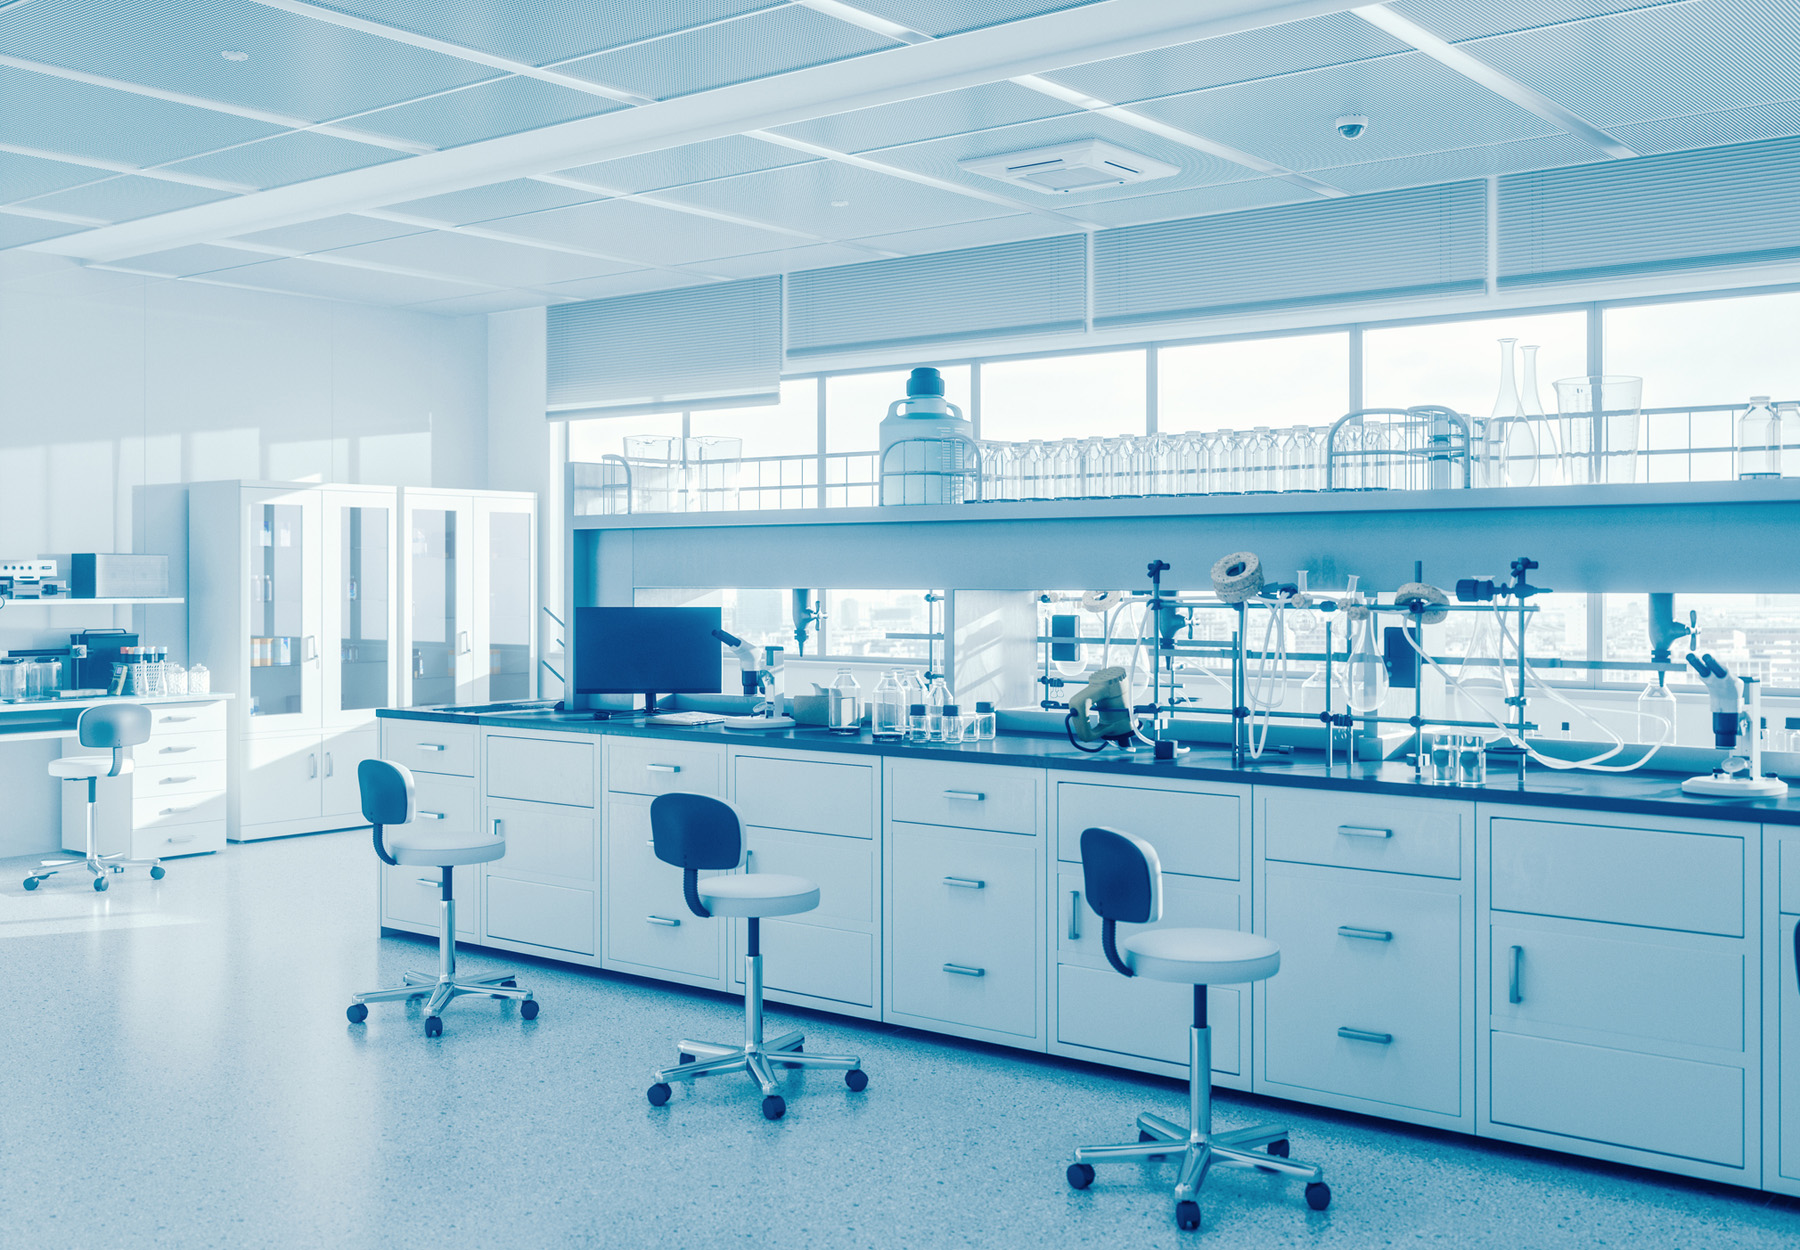 An empty laboratory in various shades of blue. Stock image.